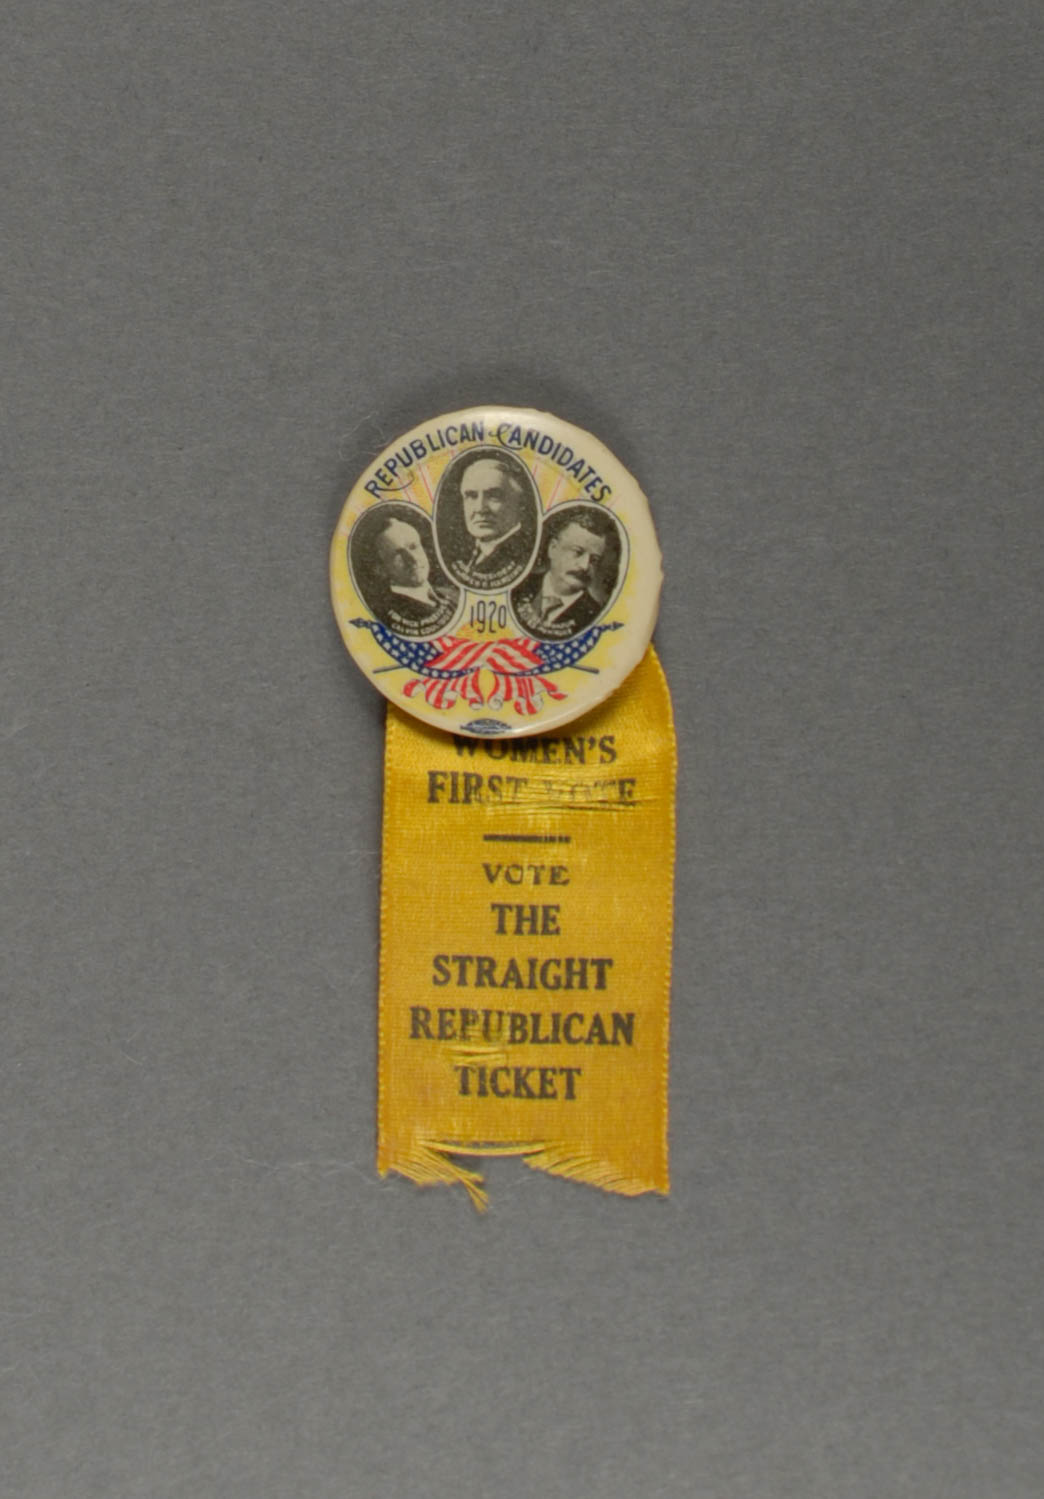 2015.22.720 - Badge from the first Presidential election that all U.S. women were able to vote in. Krasik Collection of Pennsylvania and Presidential Political Memorabilia, Heinz History Center.